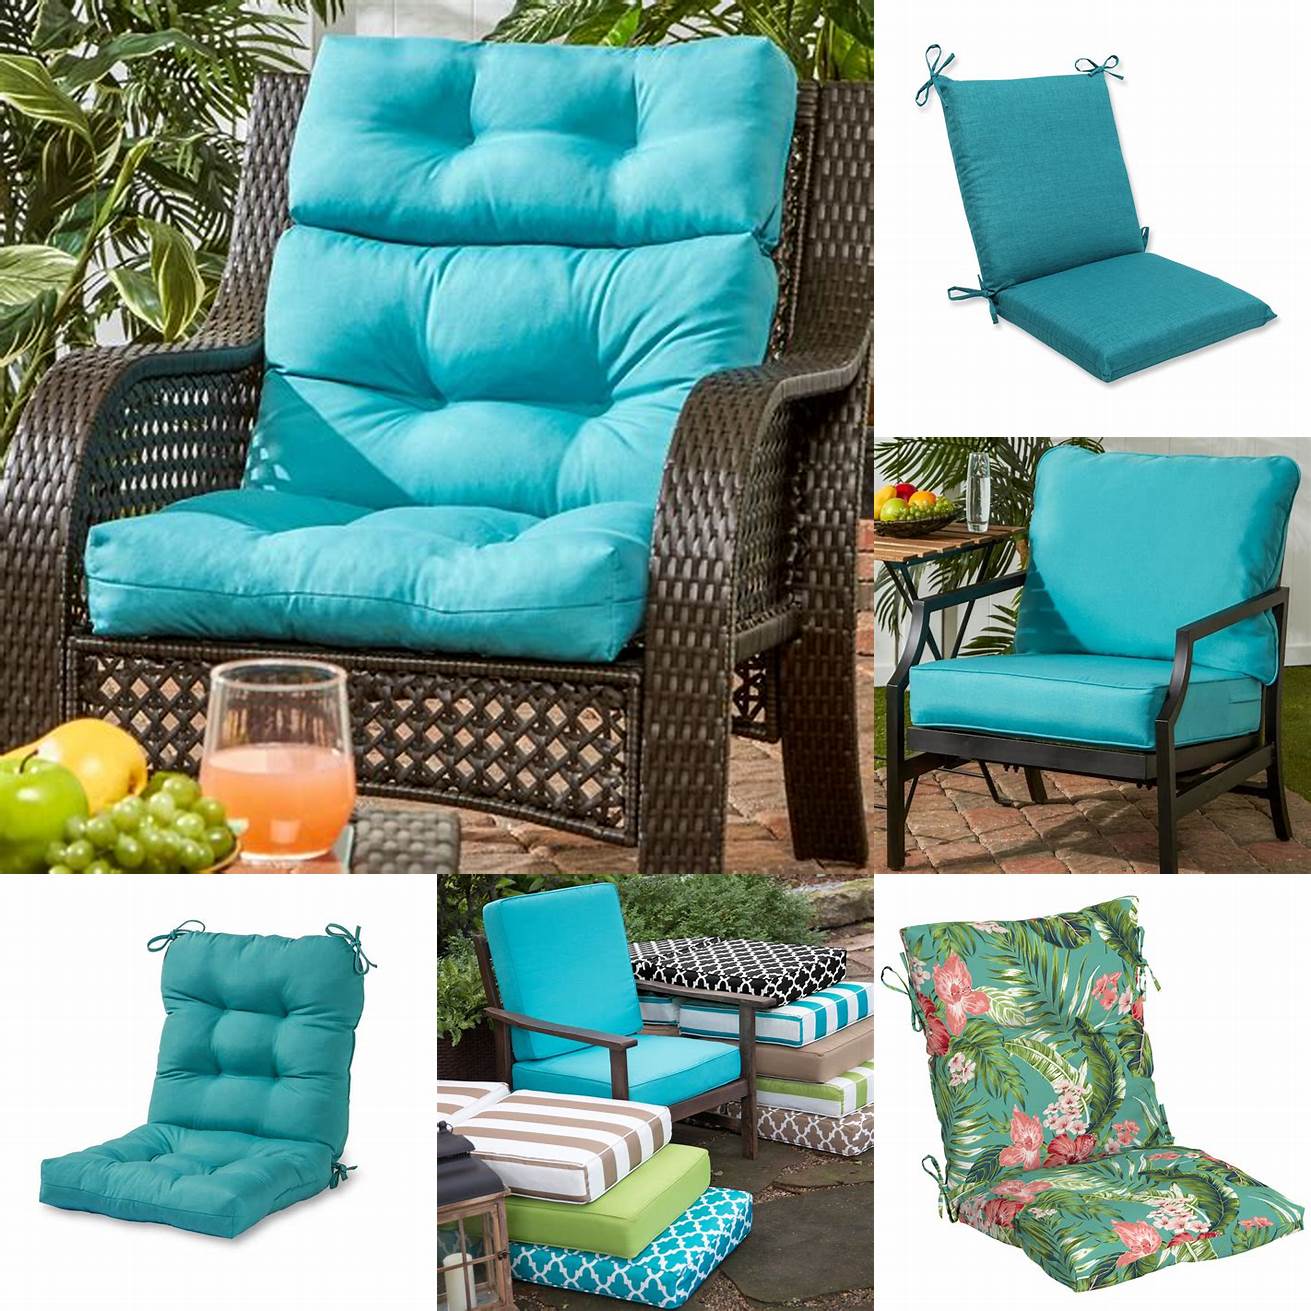 Teal outdoor cushions